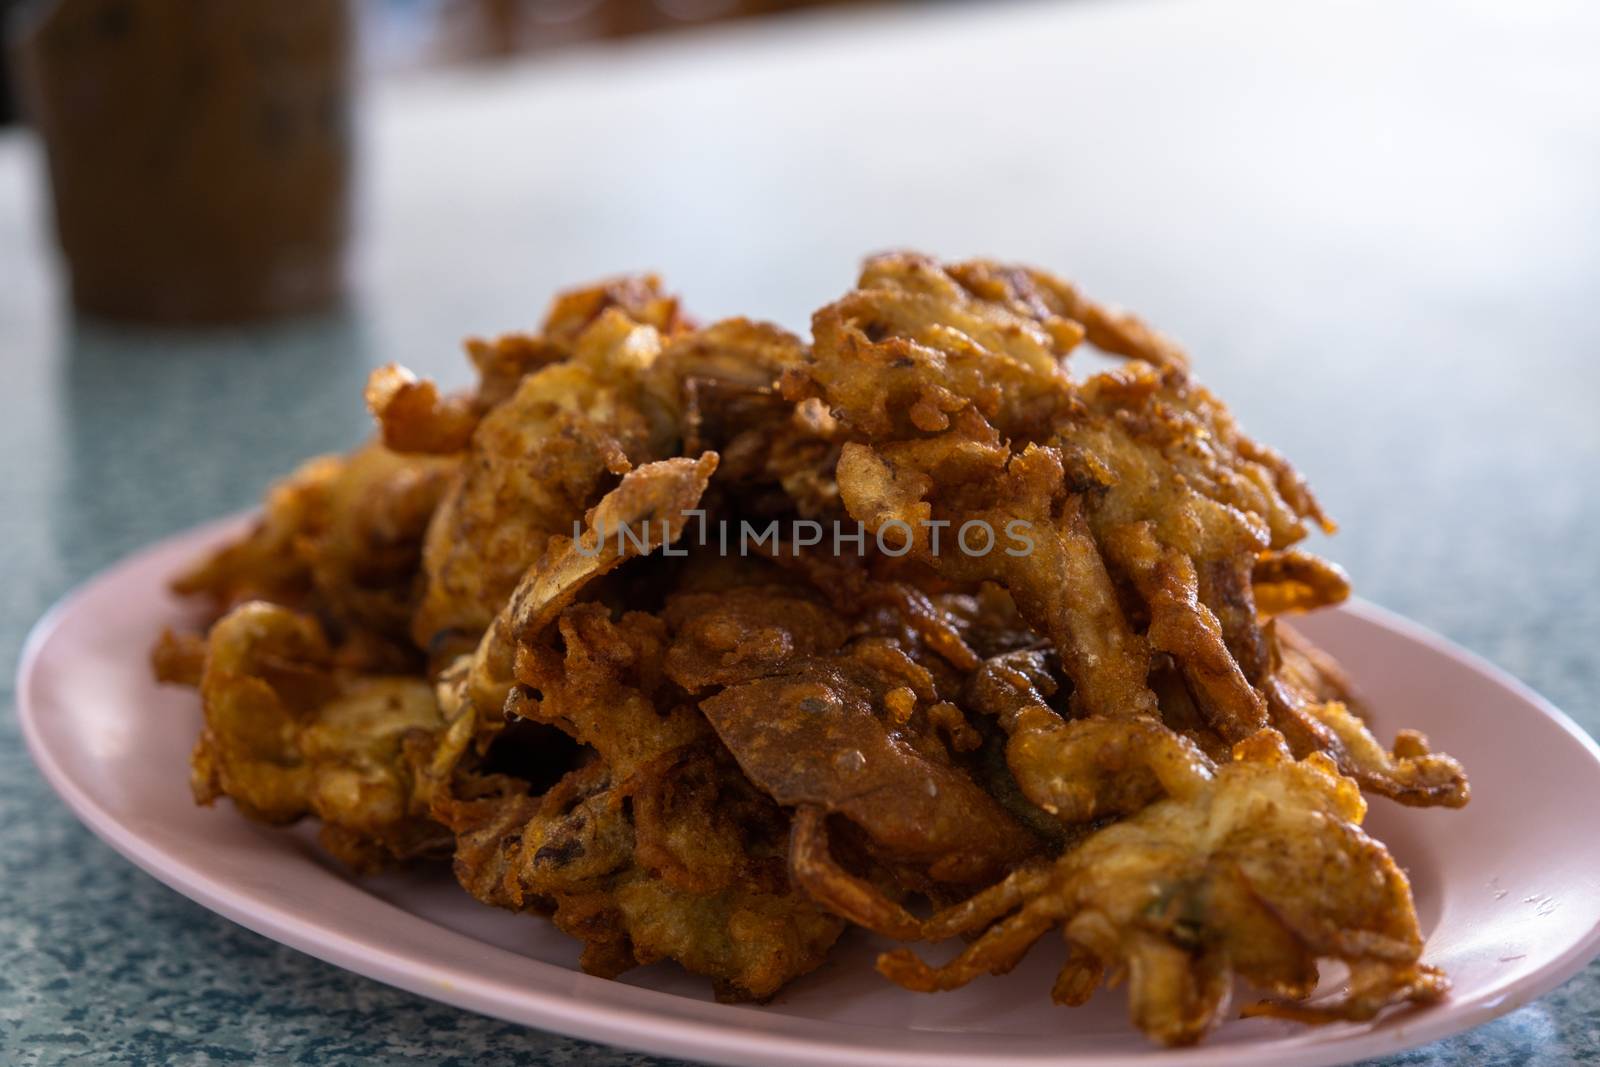 The Soft Shell Crab fried with garlic on plate in restaurant.